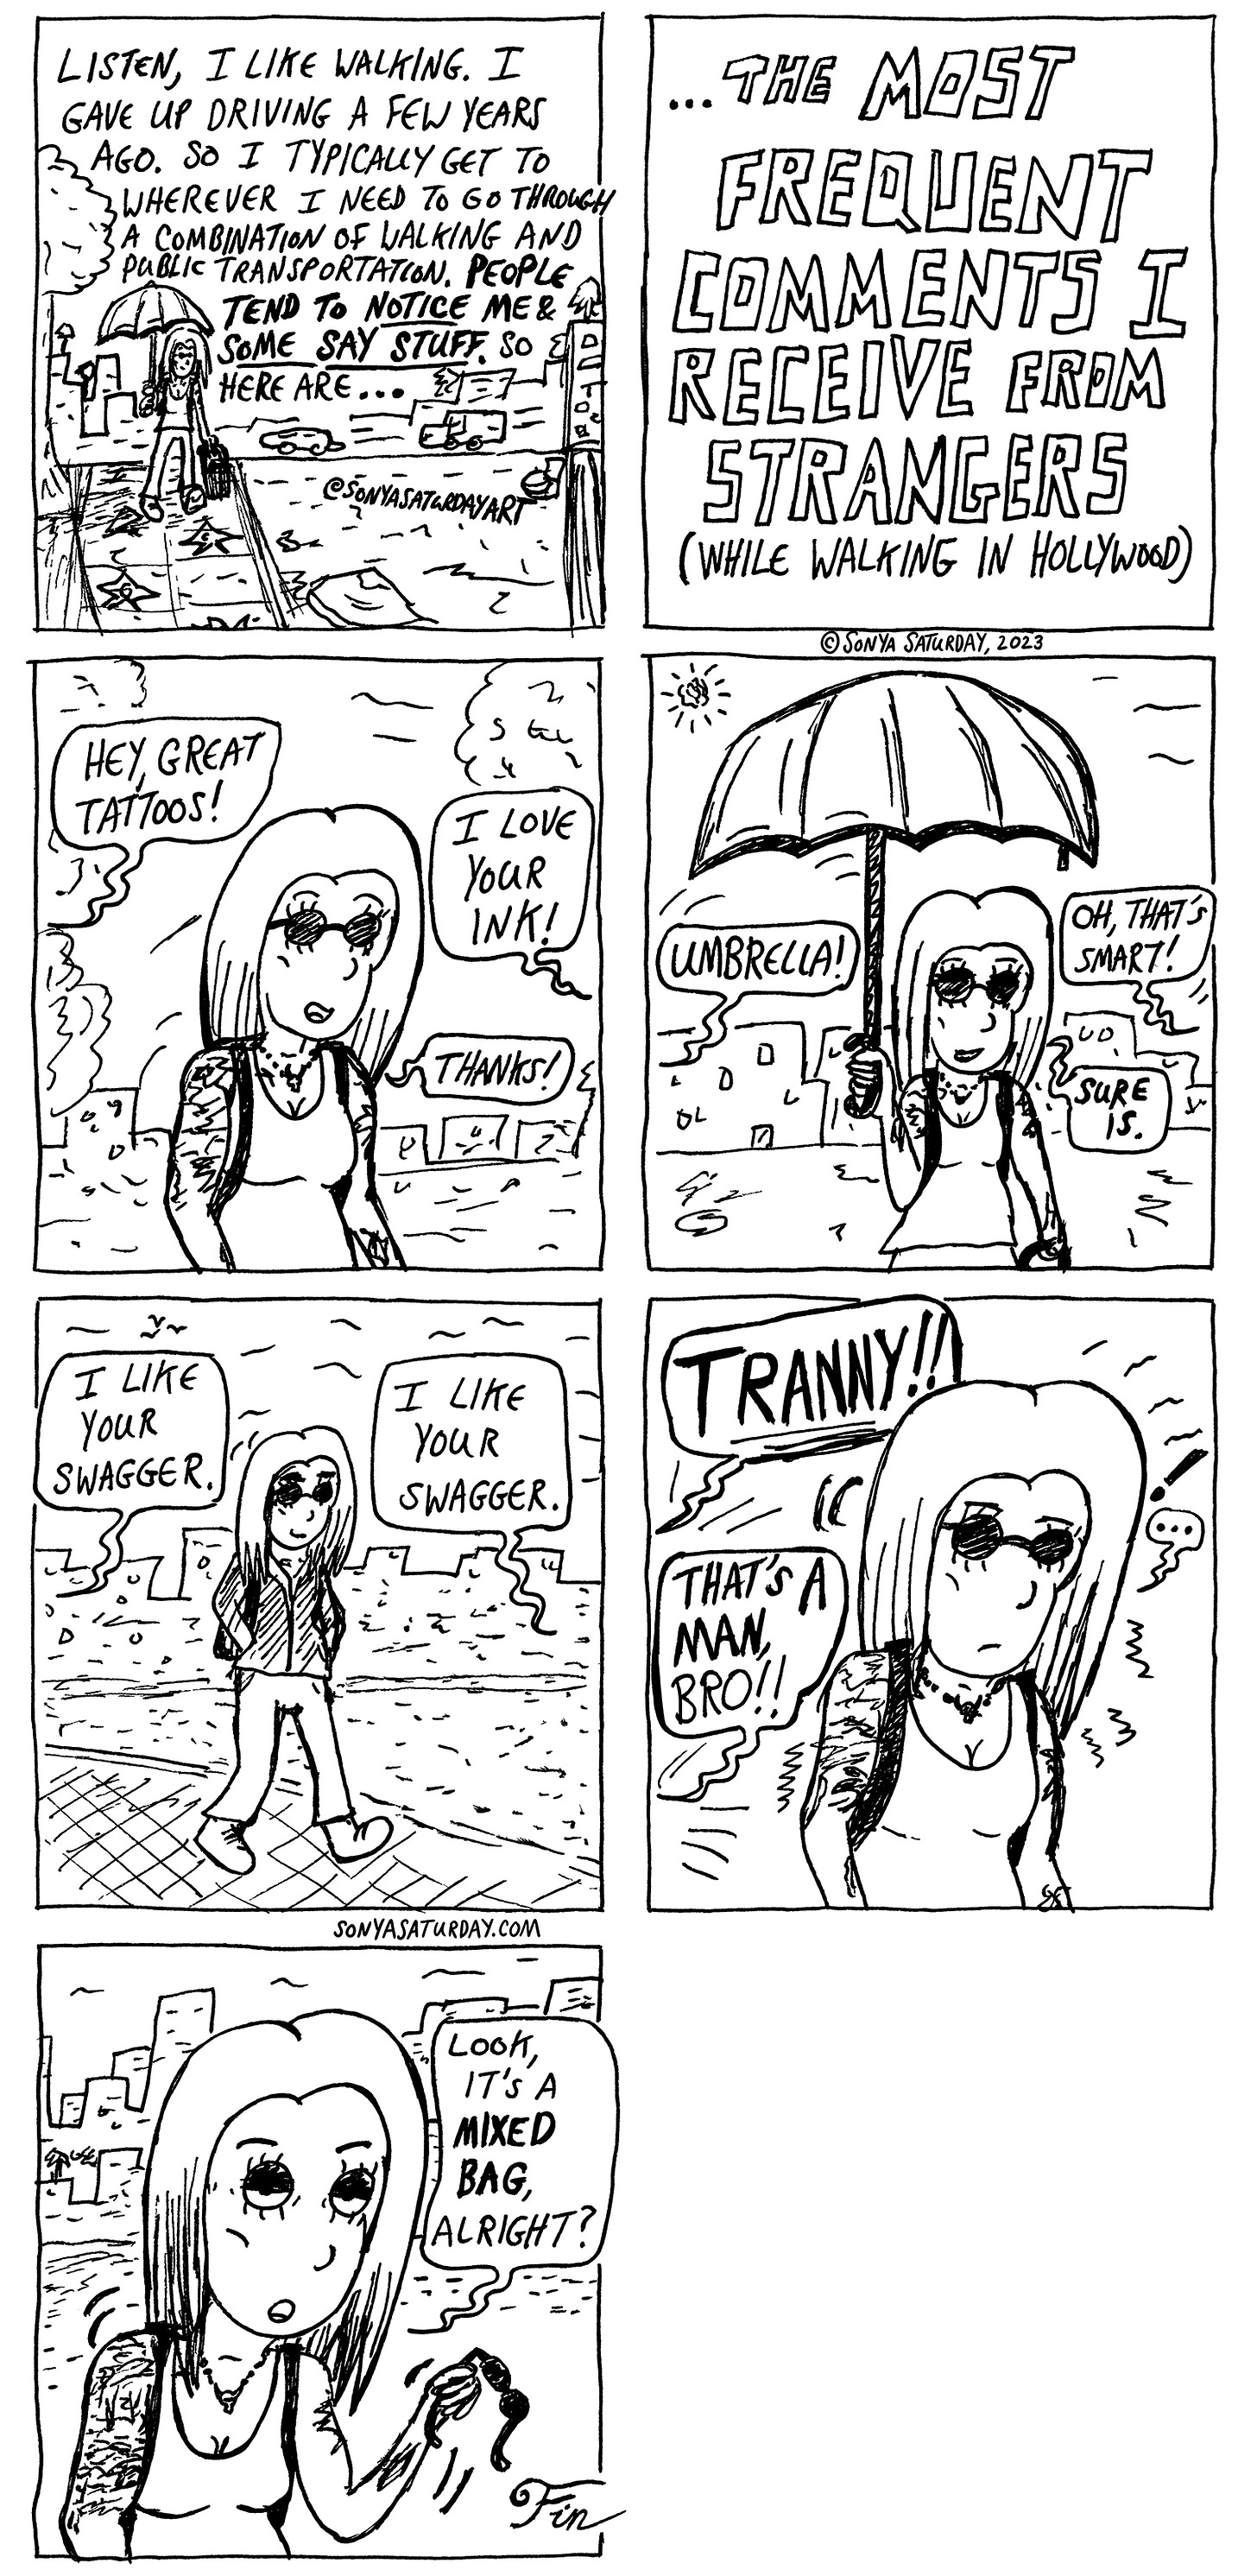 Comic strip about people shouting remarks at Sonya Saturday while she walks through Hollywood